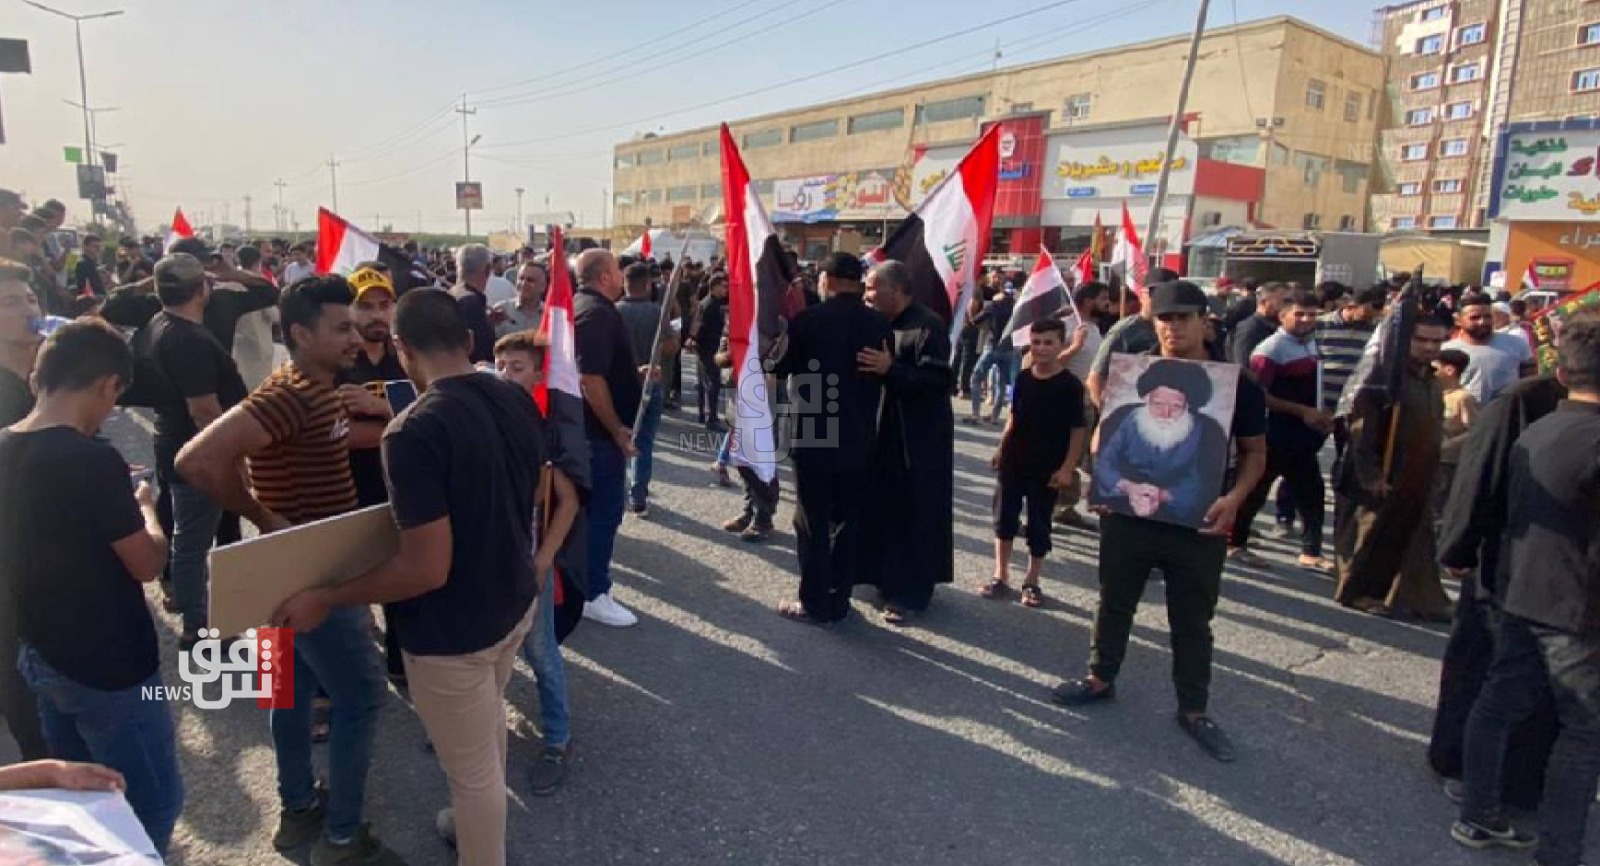 In response to the movement's call, hundreds of al-Sadr's supporters demonstrate in the Nineveh Plain